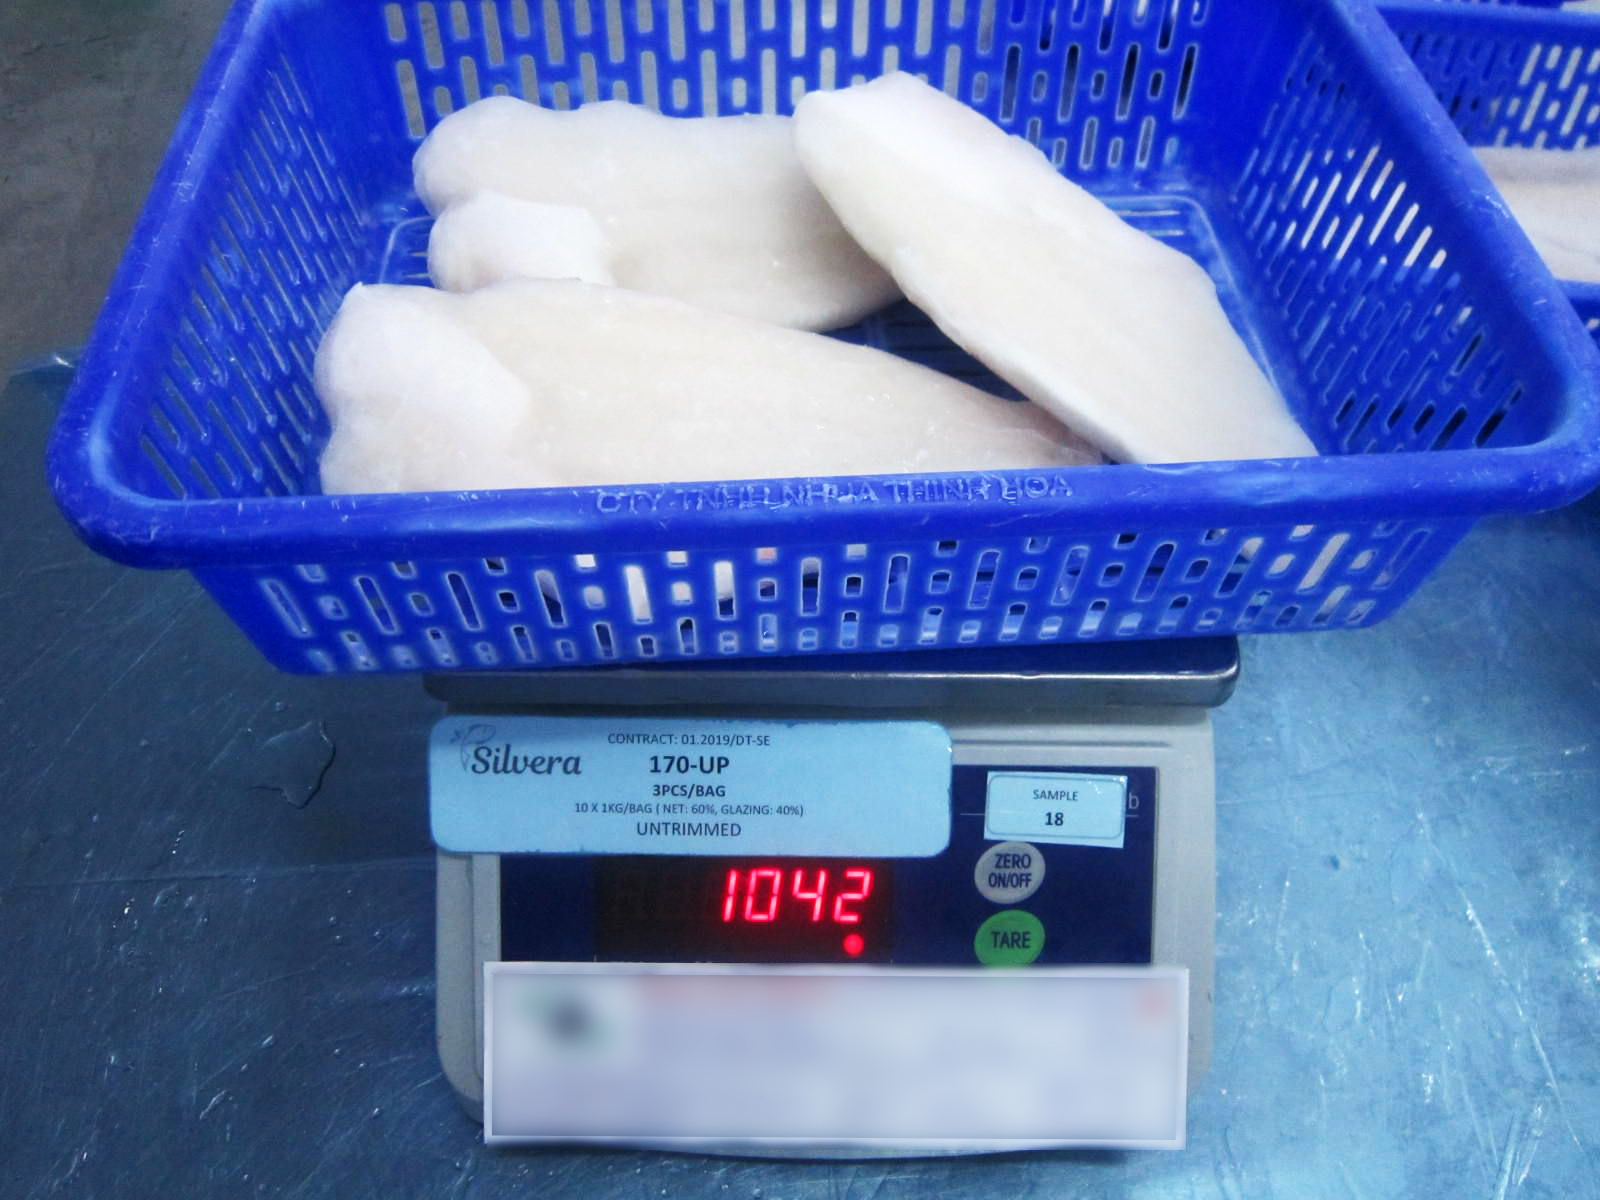 Checking The Total Weight Of Frozen Pangasius Well-Trimmed Fillets 